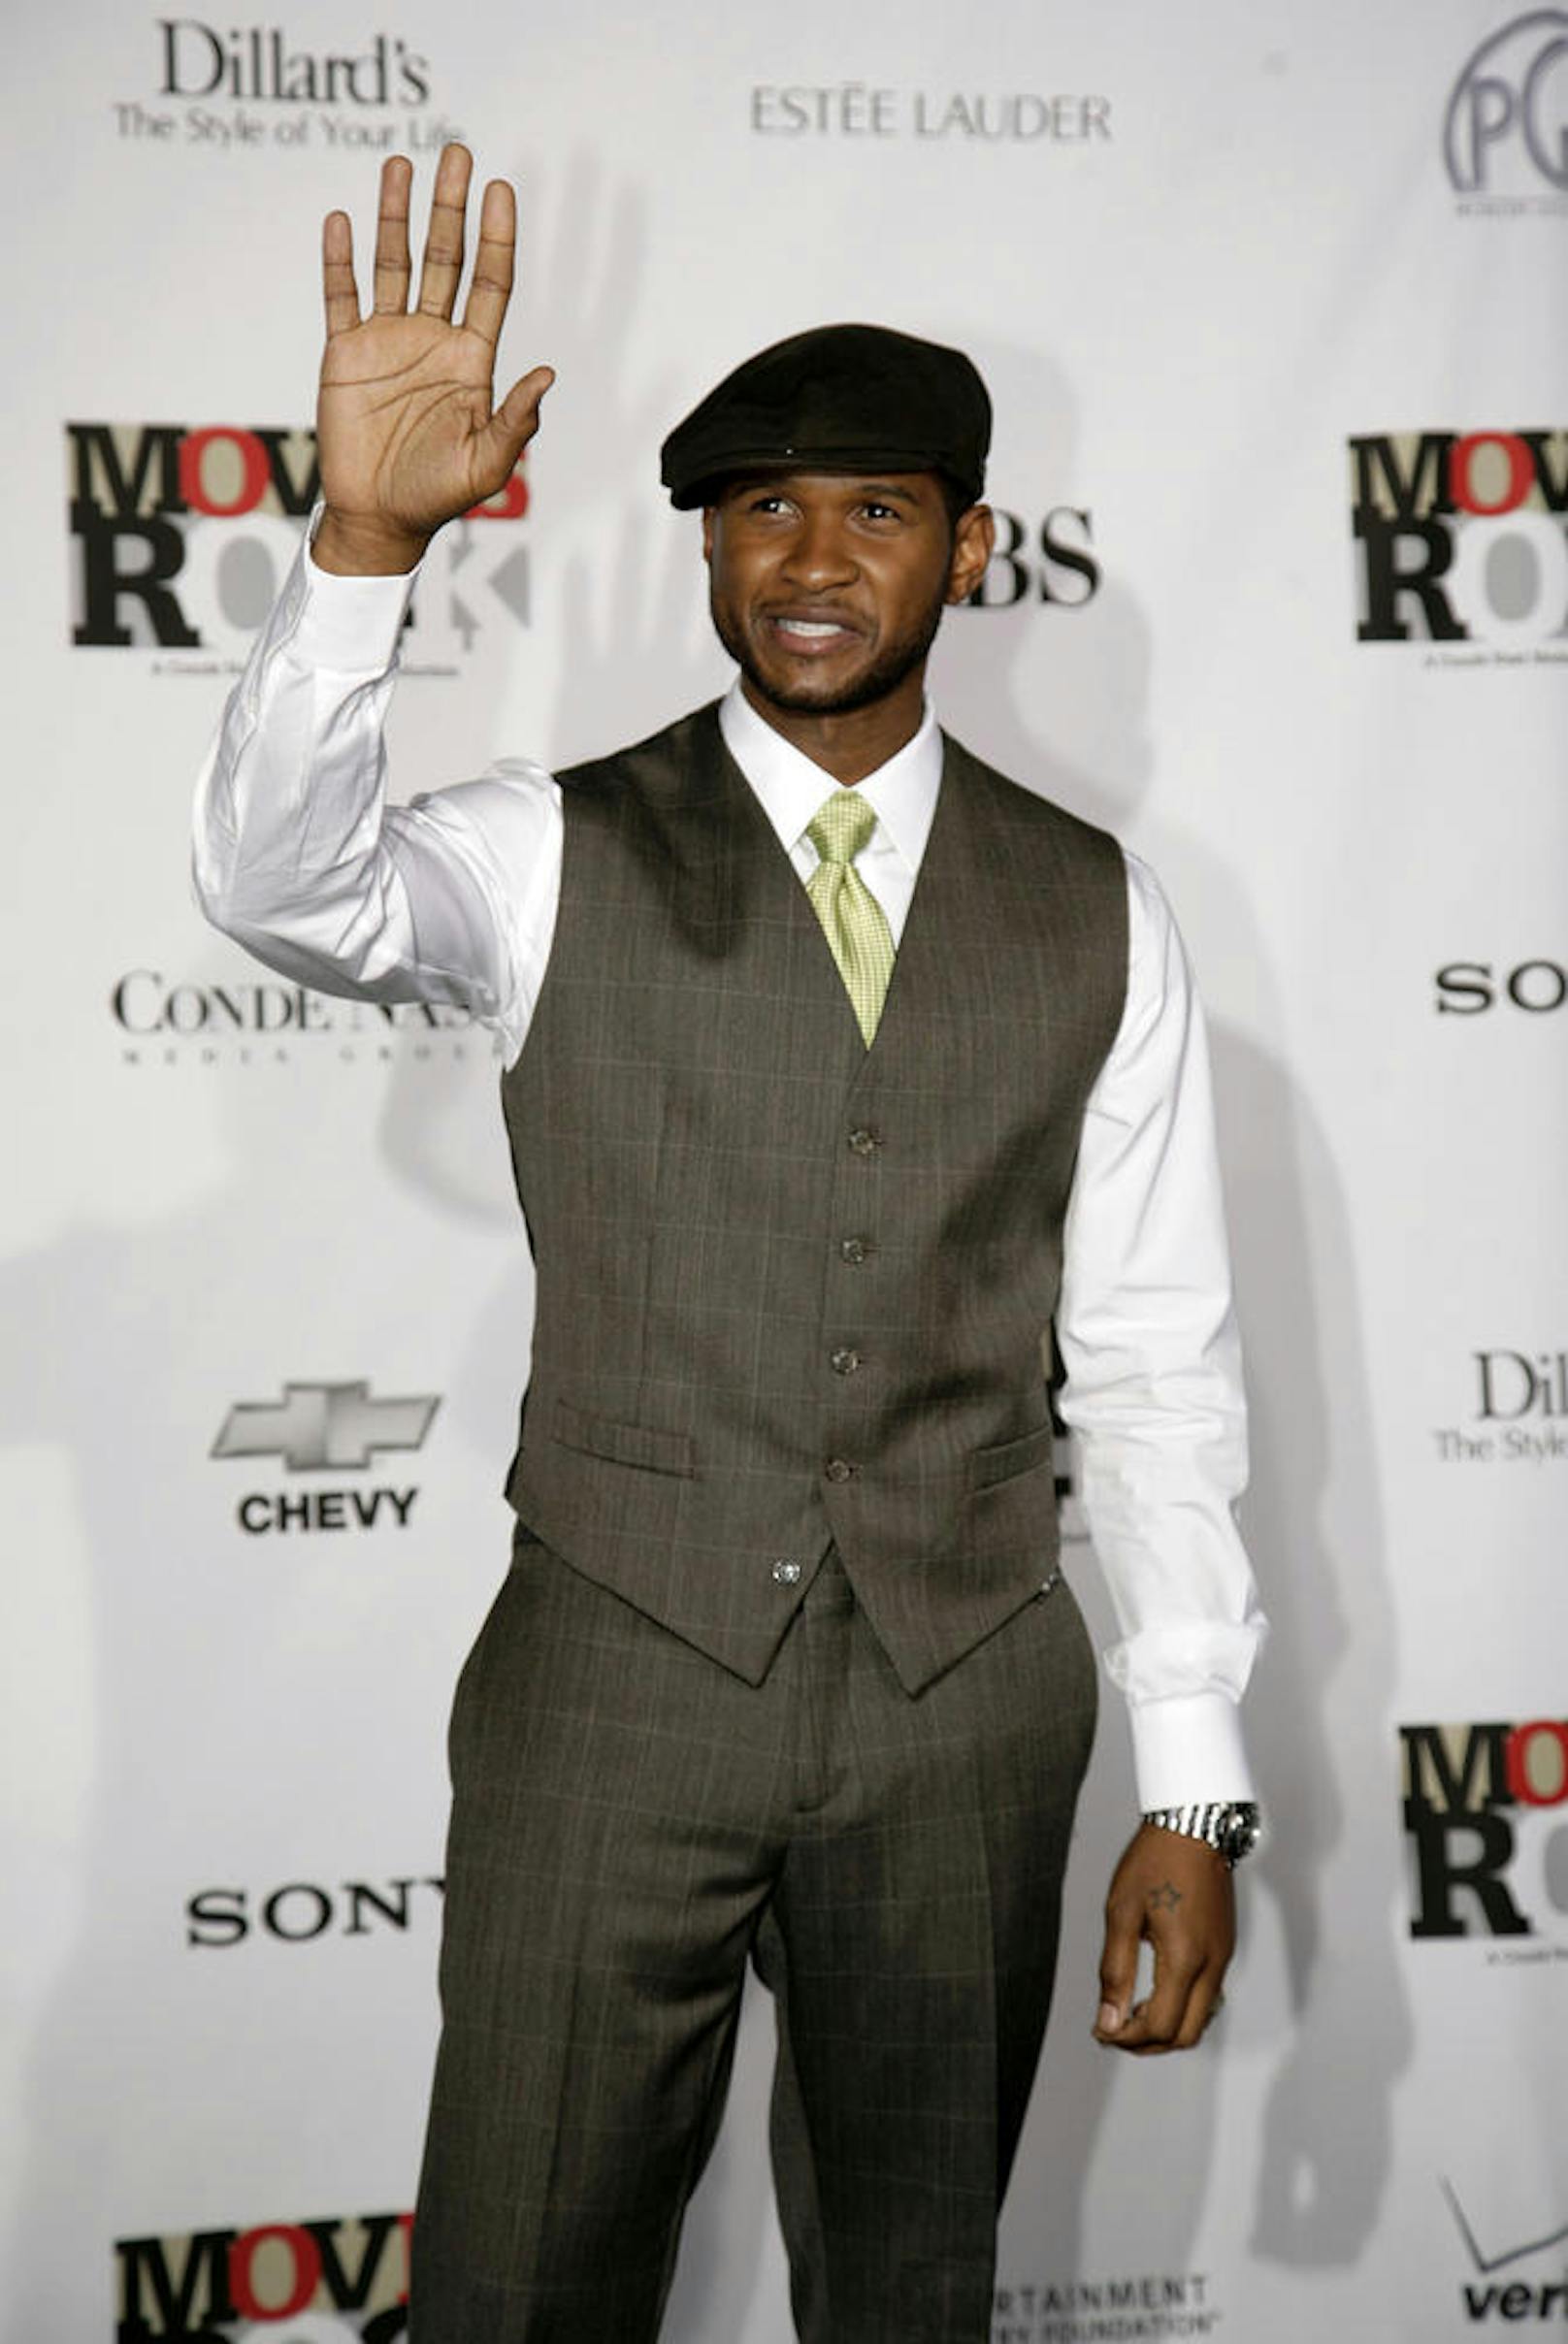 Usher bei "Movies Rock" in Hollywood, 2007.